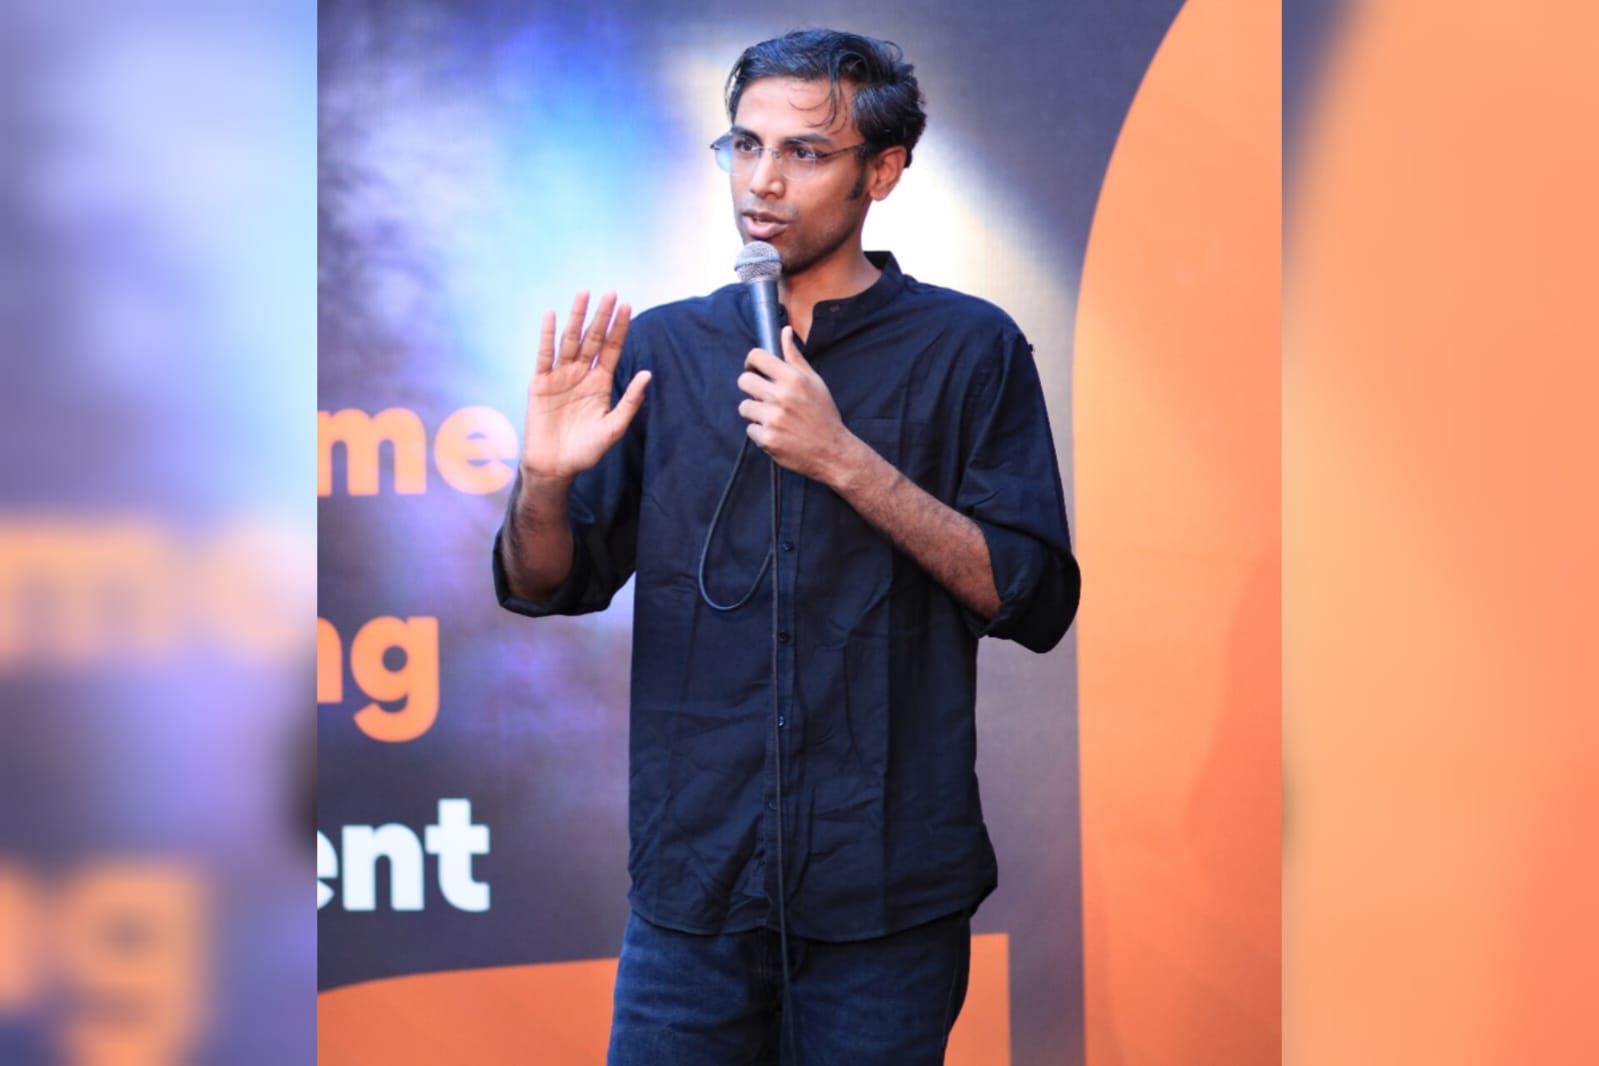 Biswa Kalyan Rath performing at a corporate event in Bangalore